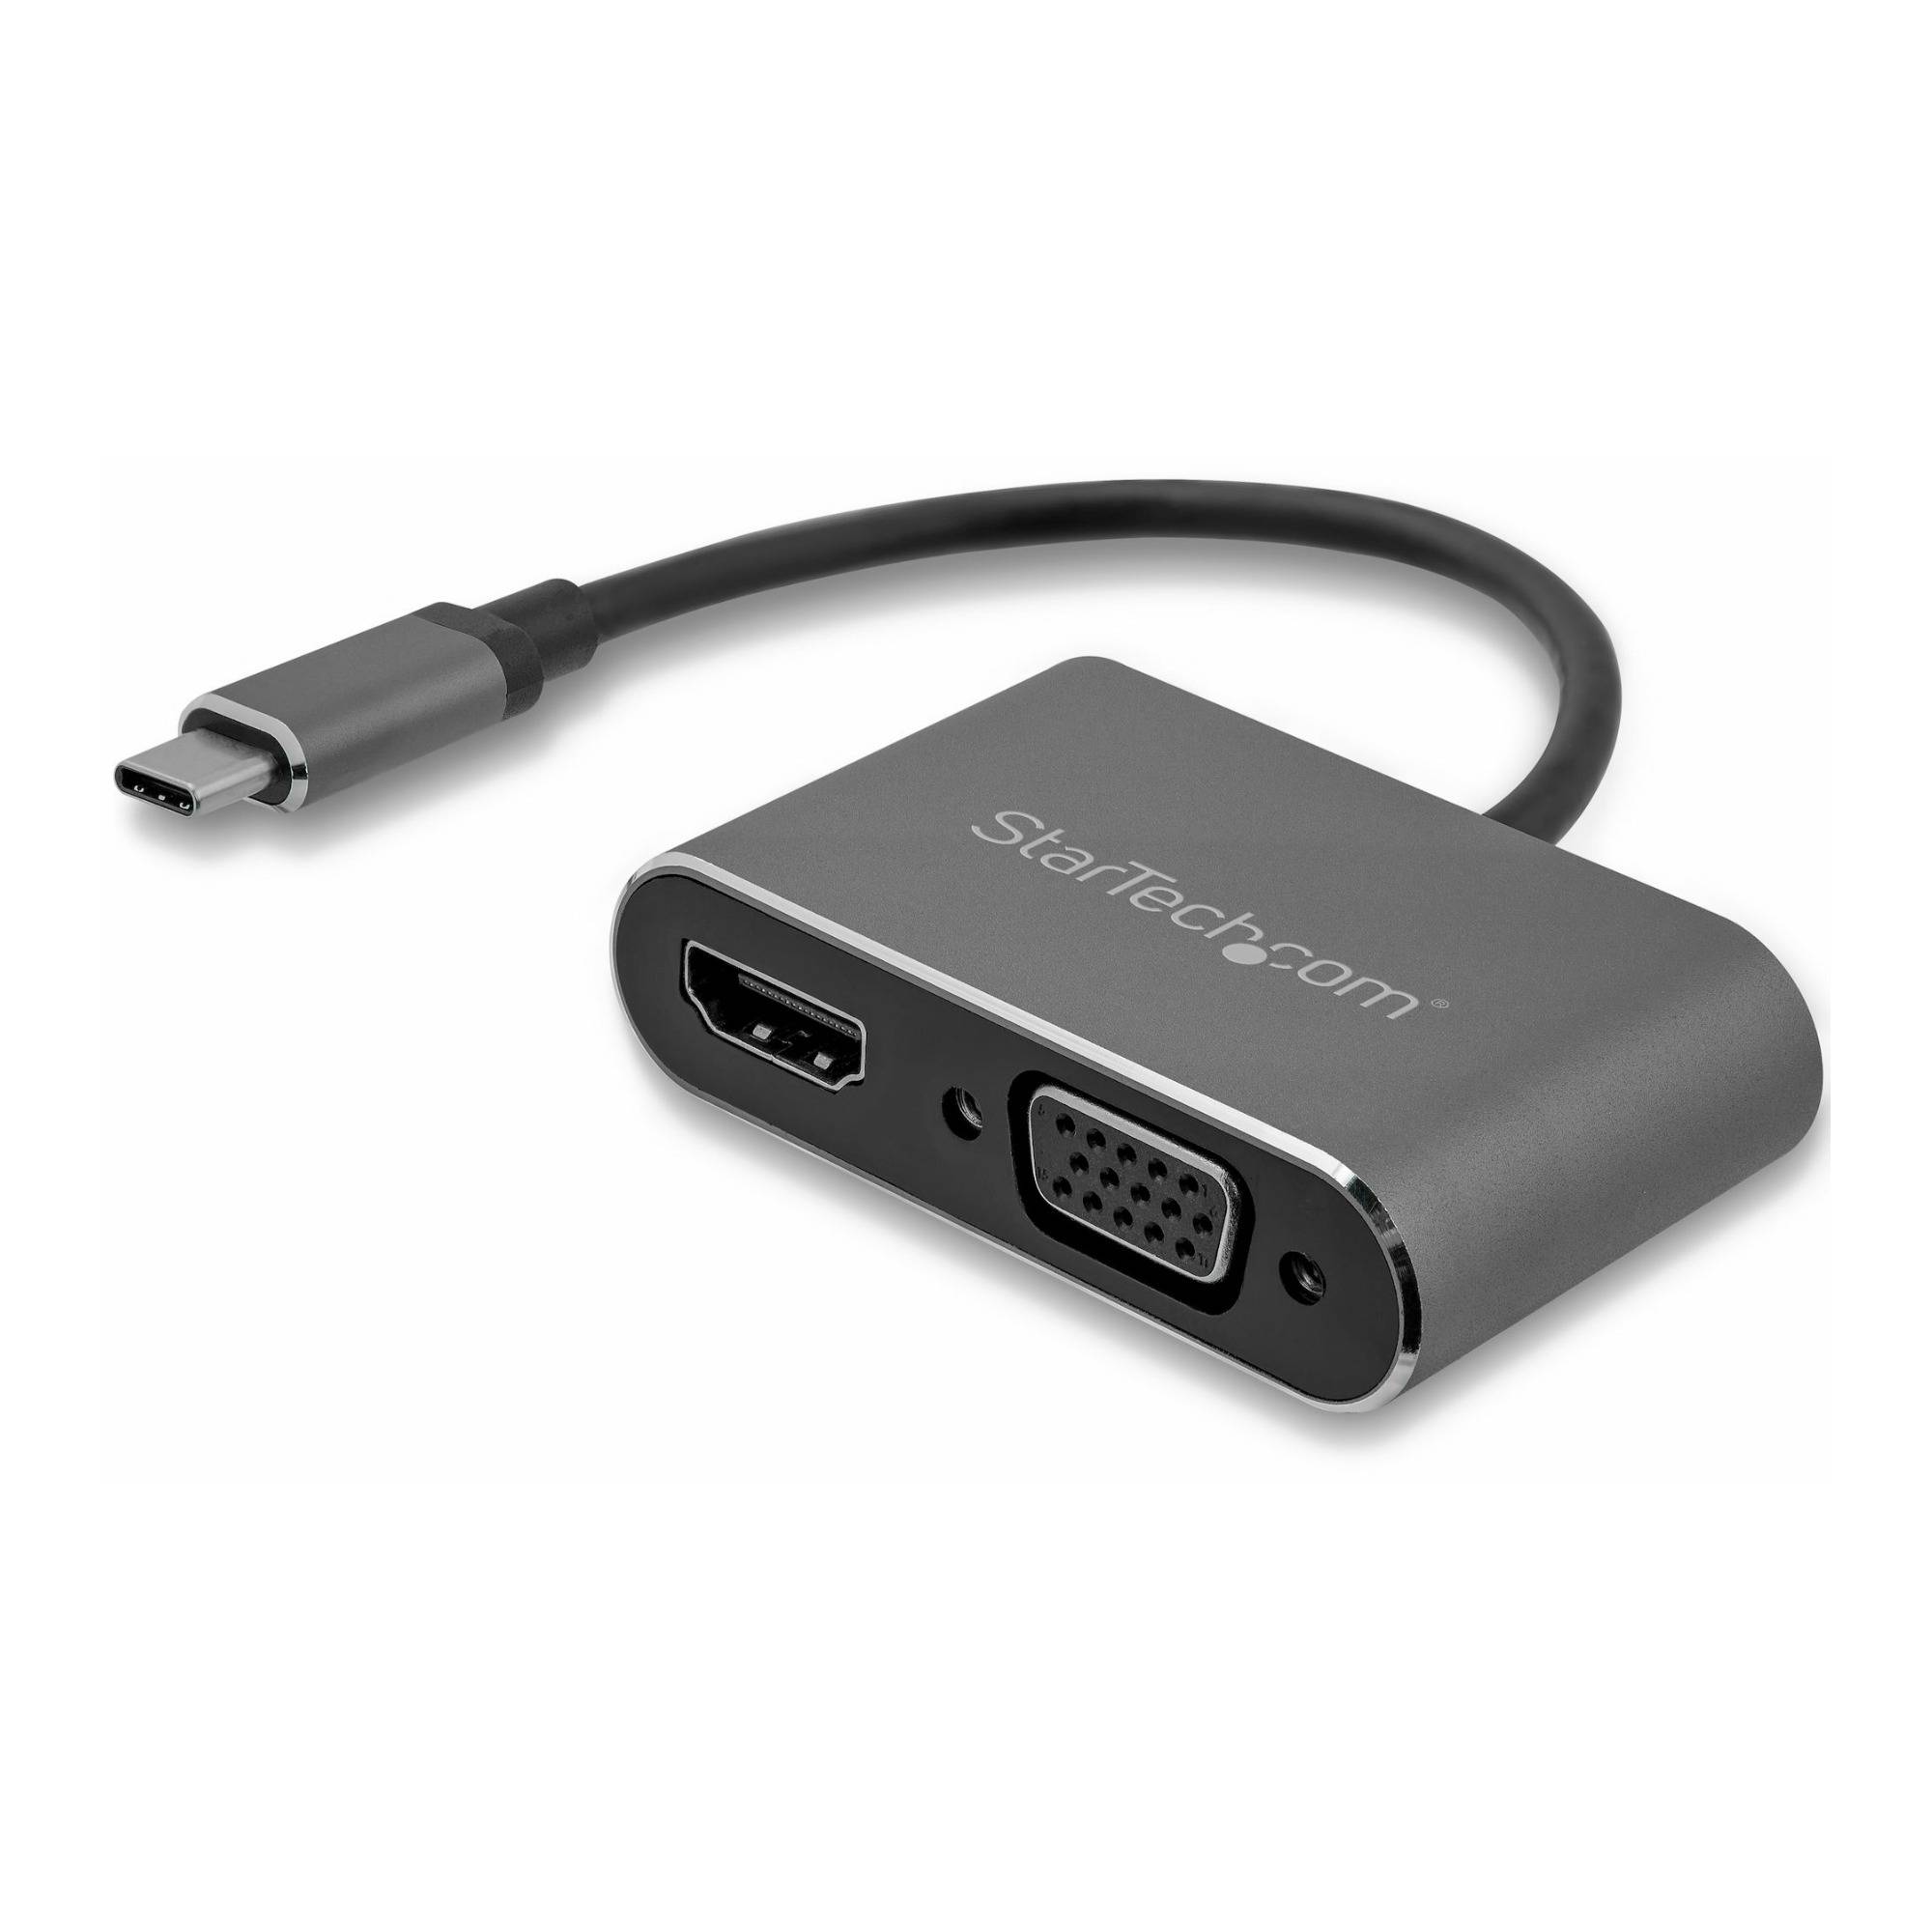 StarTech USB-C to VGA and HDMI Adapter